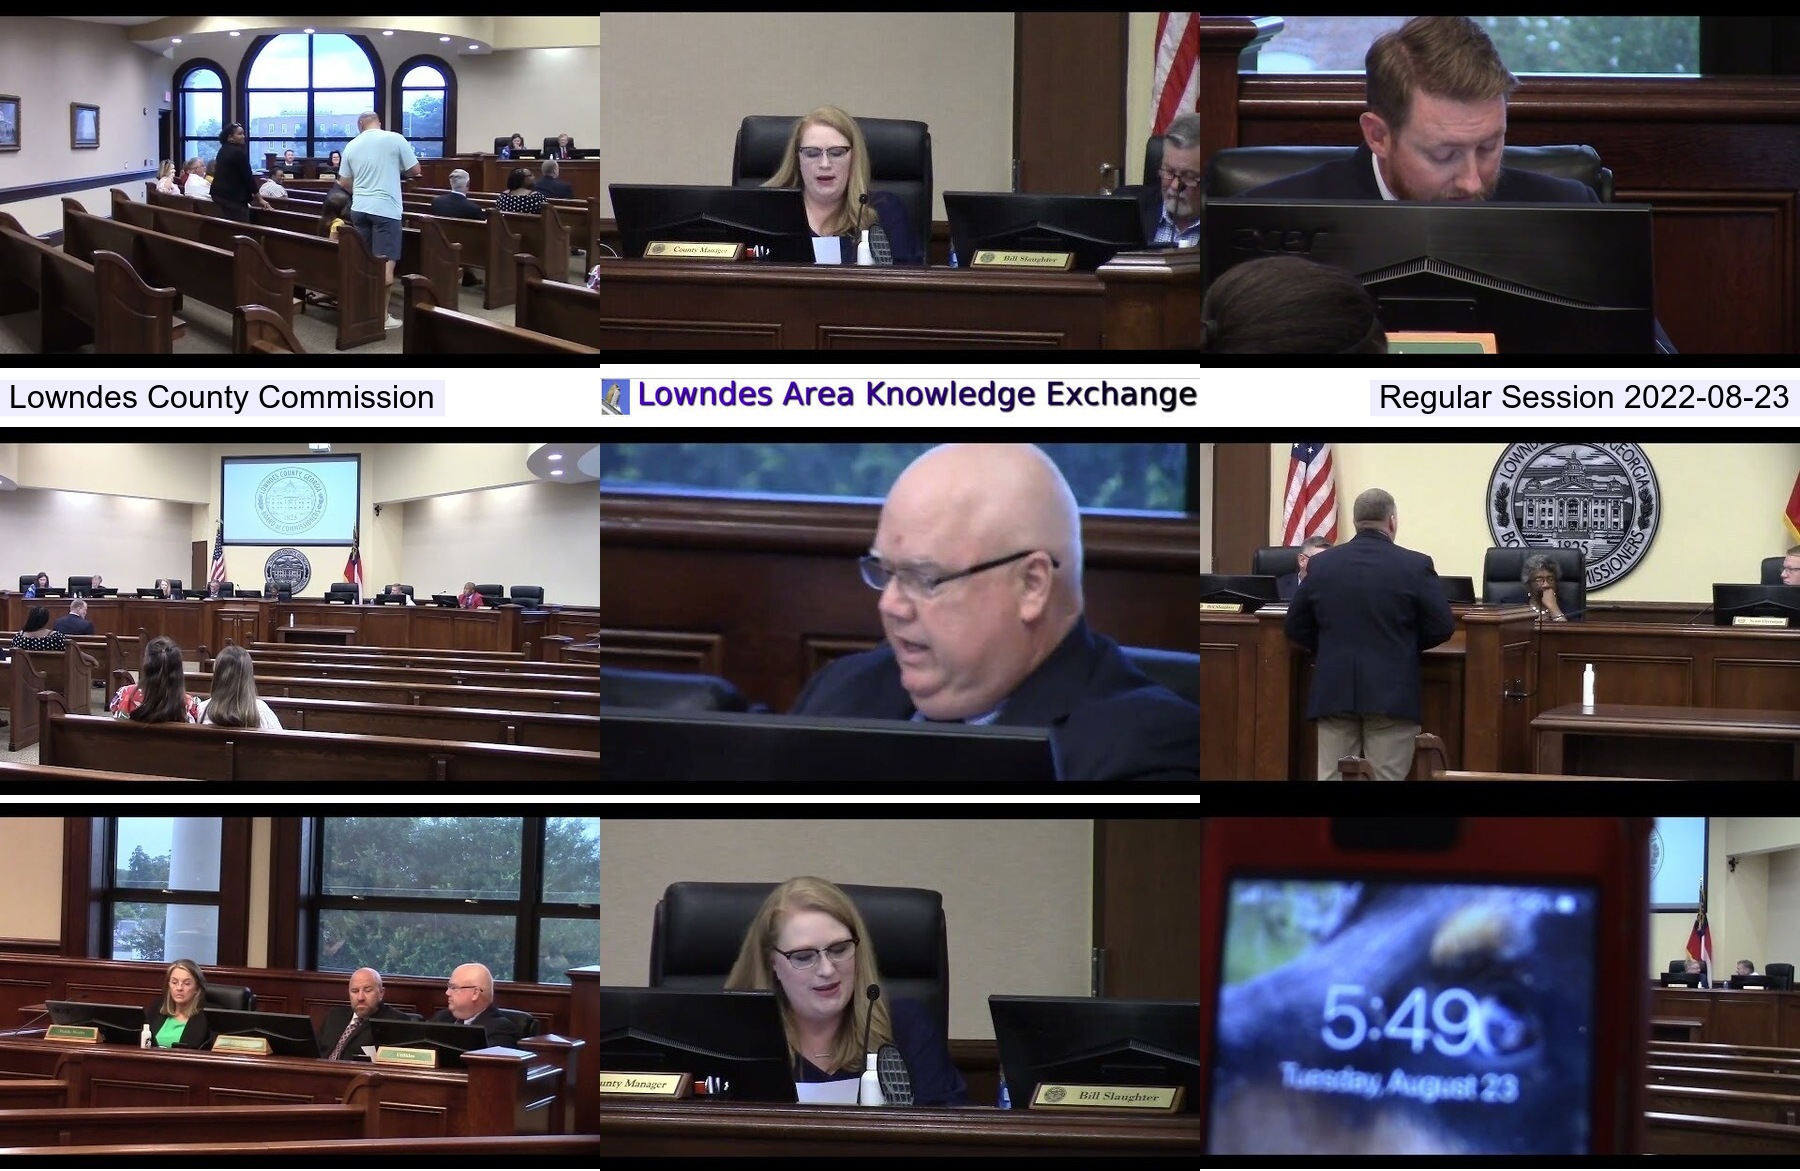 Collage, Lowndes County Commission Regular Session 2022-08-23